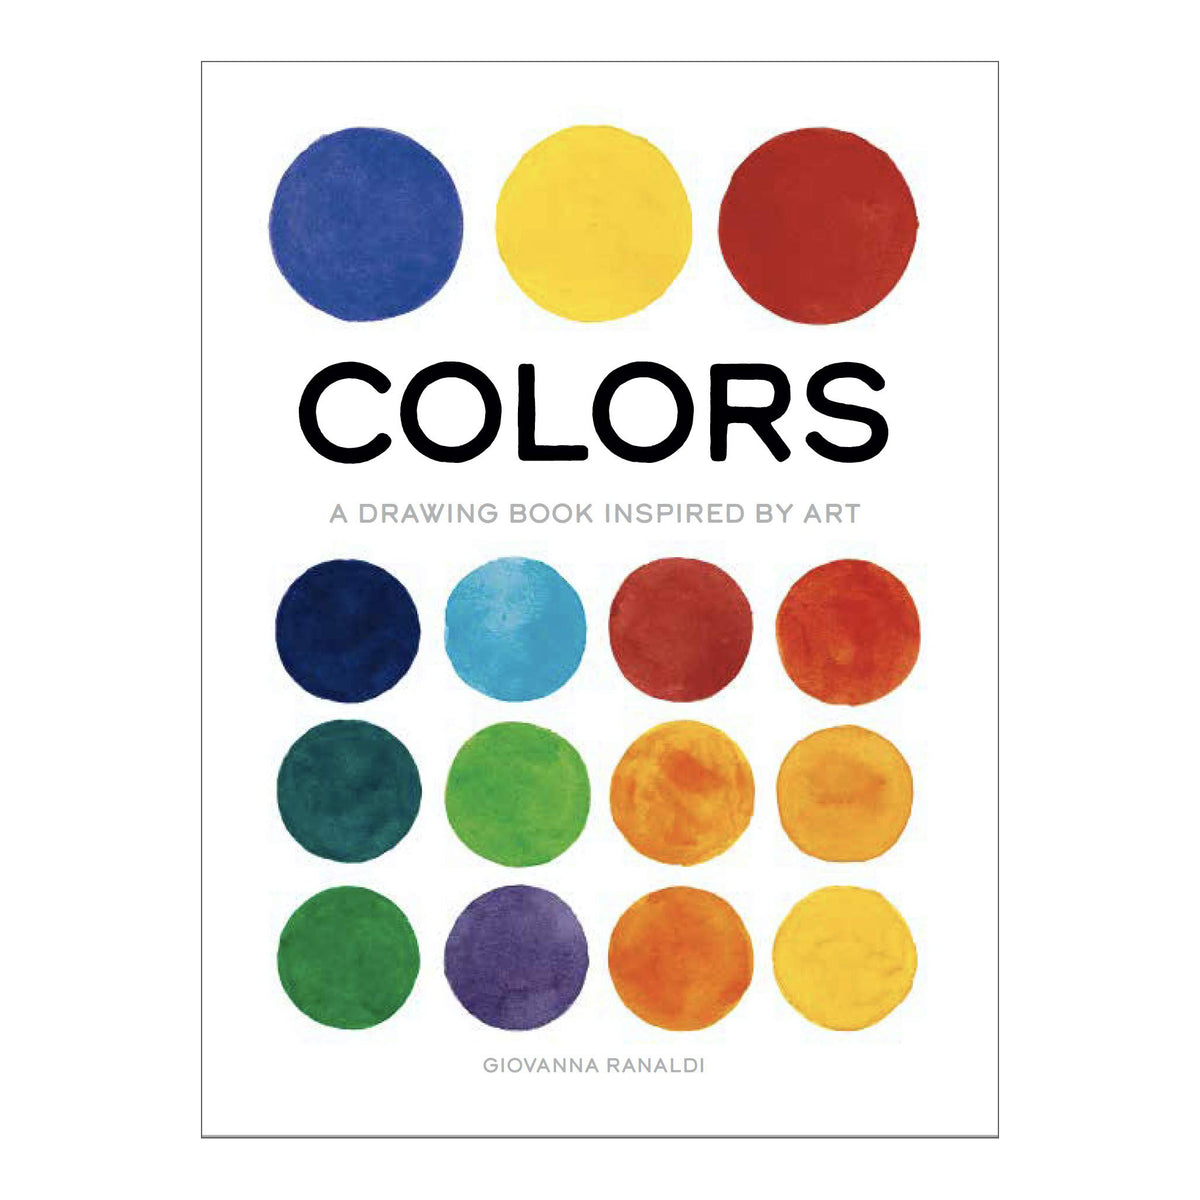 Colors: A Drawing Book Inspired by Art